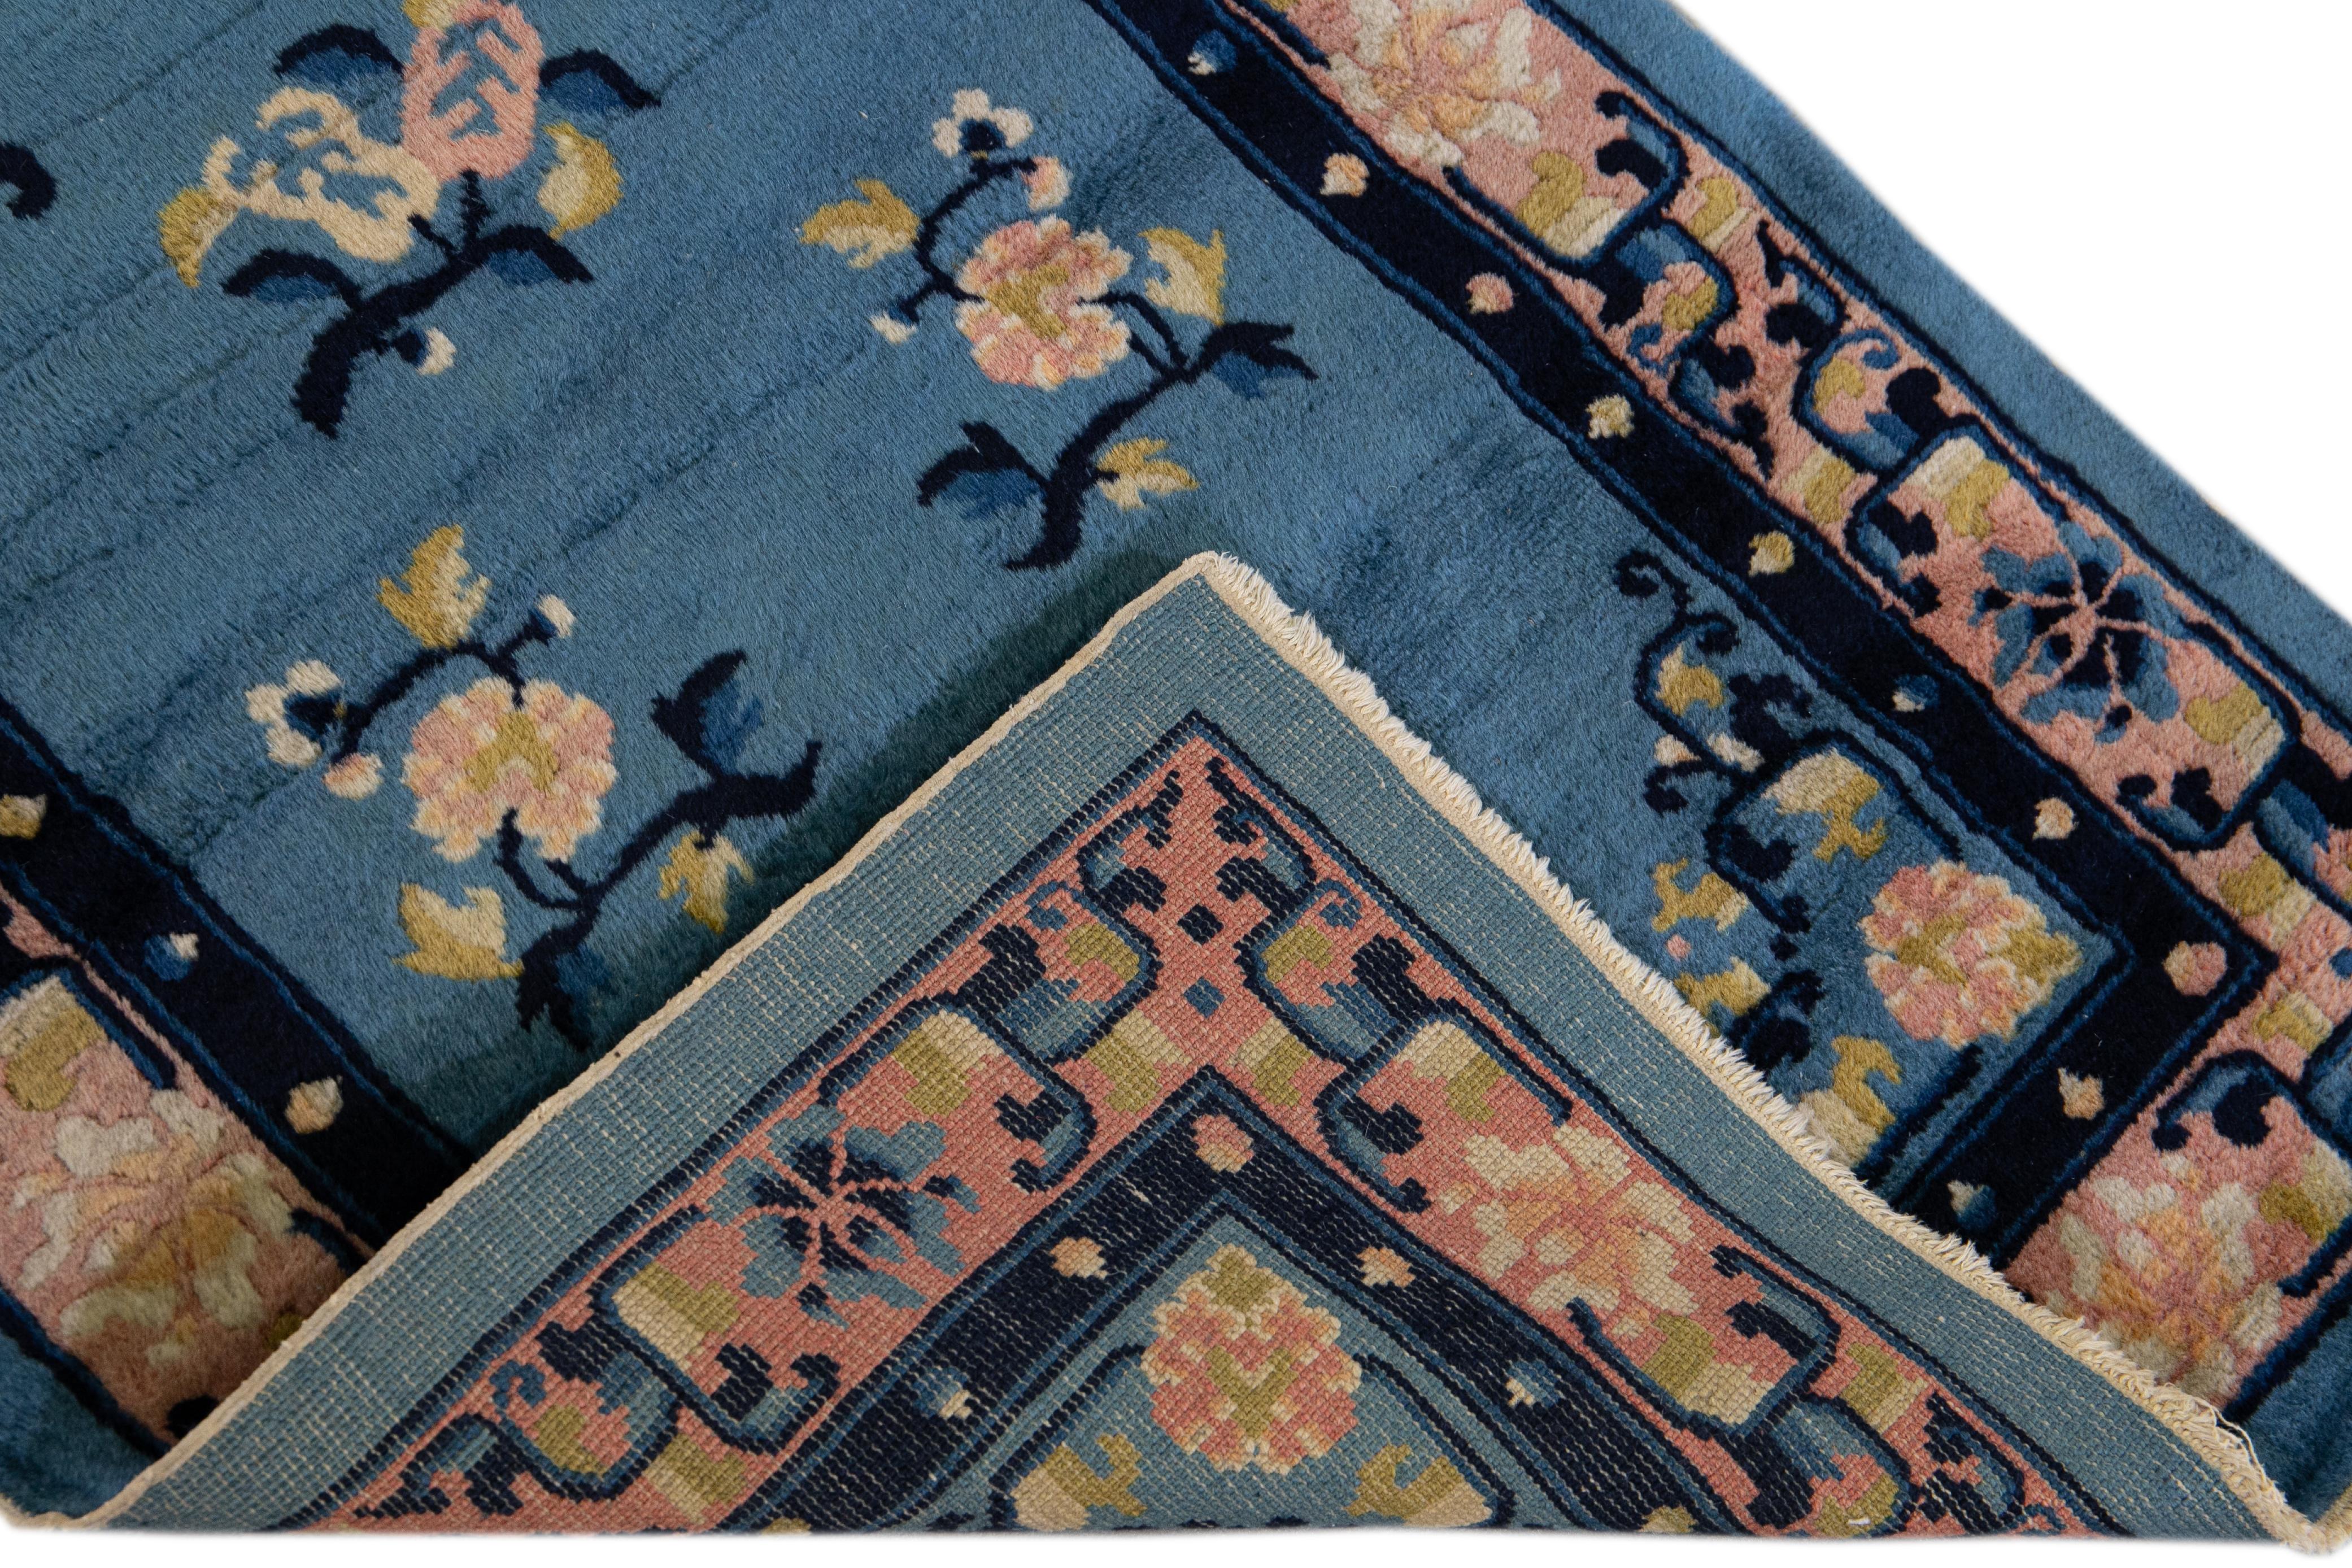 Beautiful antique Art Deco Chinese hand-knotted wool rug with a blue field. This Chinese rug has a peach frame and ivory and goldenrod accents layout in a gorgeous Chinese floral design. 

This rug measures: 2'4